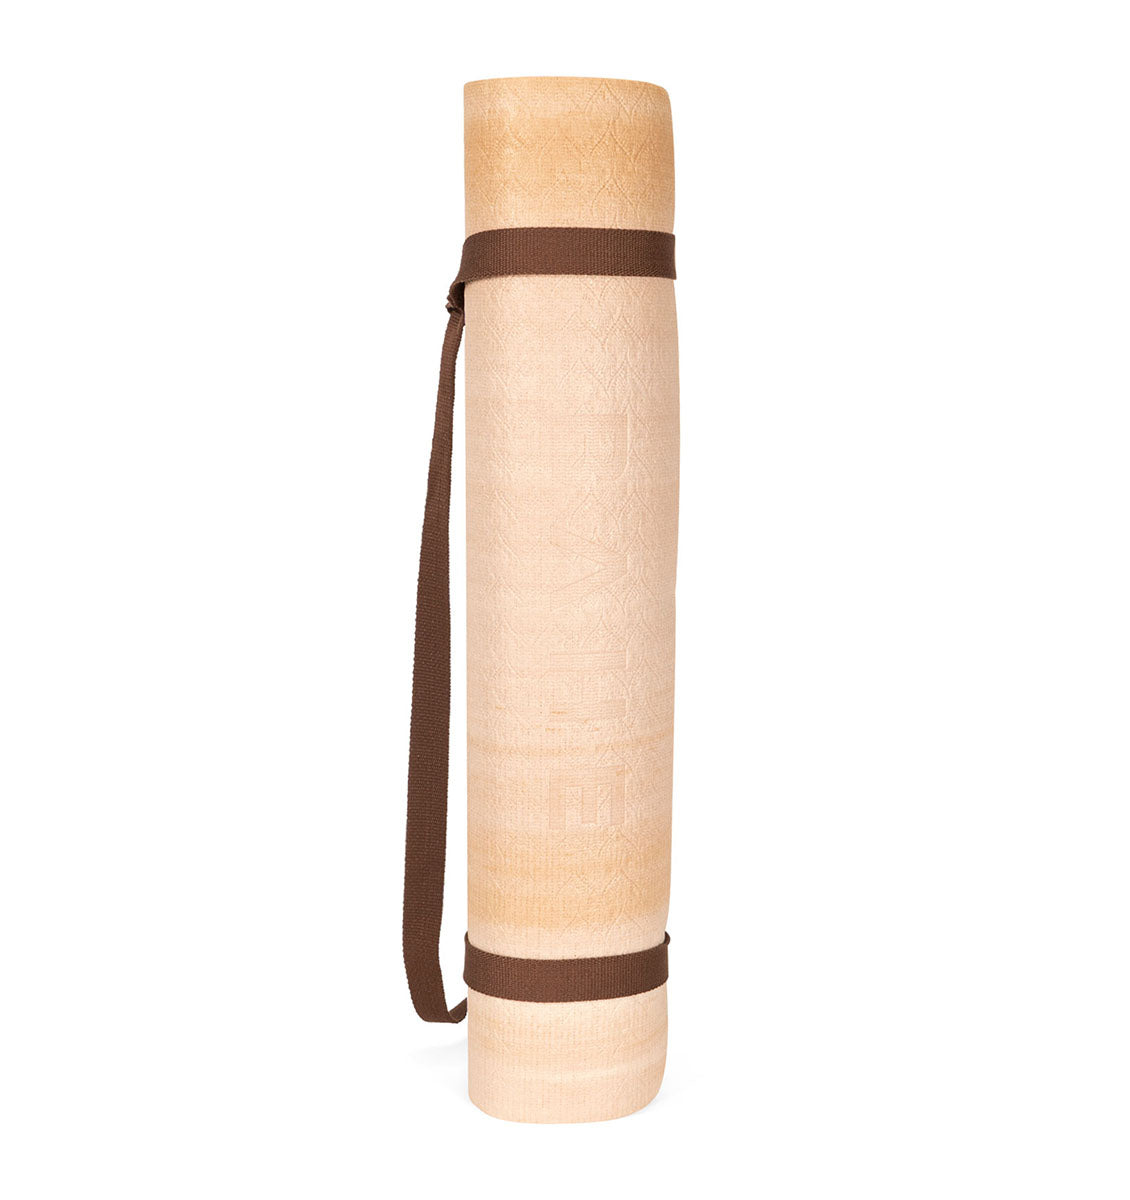 BAHE Prime Support Marble Yoga Mat - 6mm - Dusty Beige Marble - 1